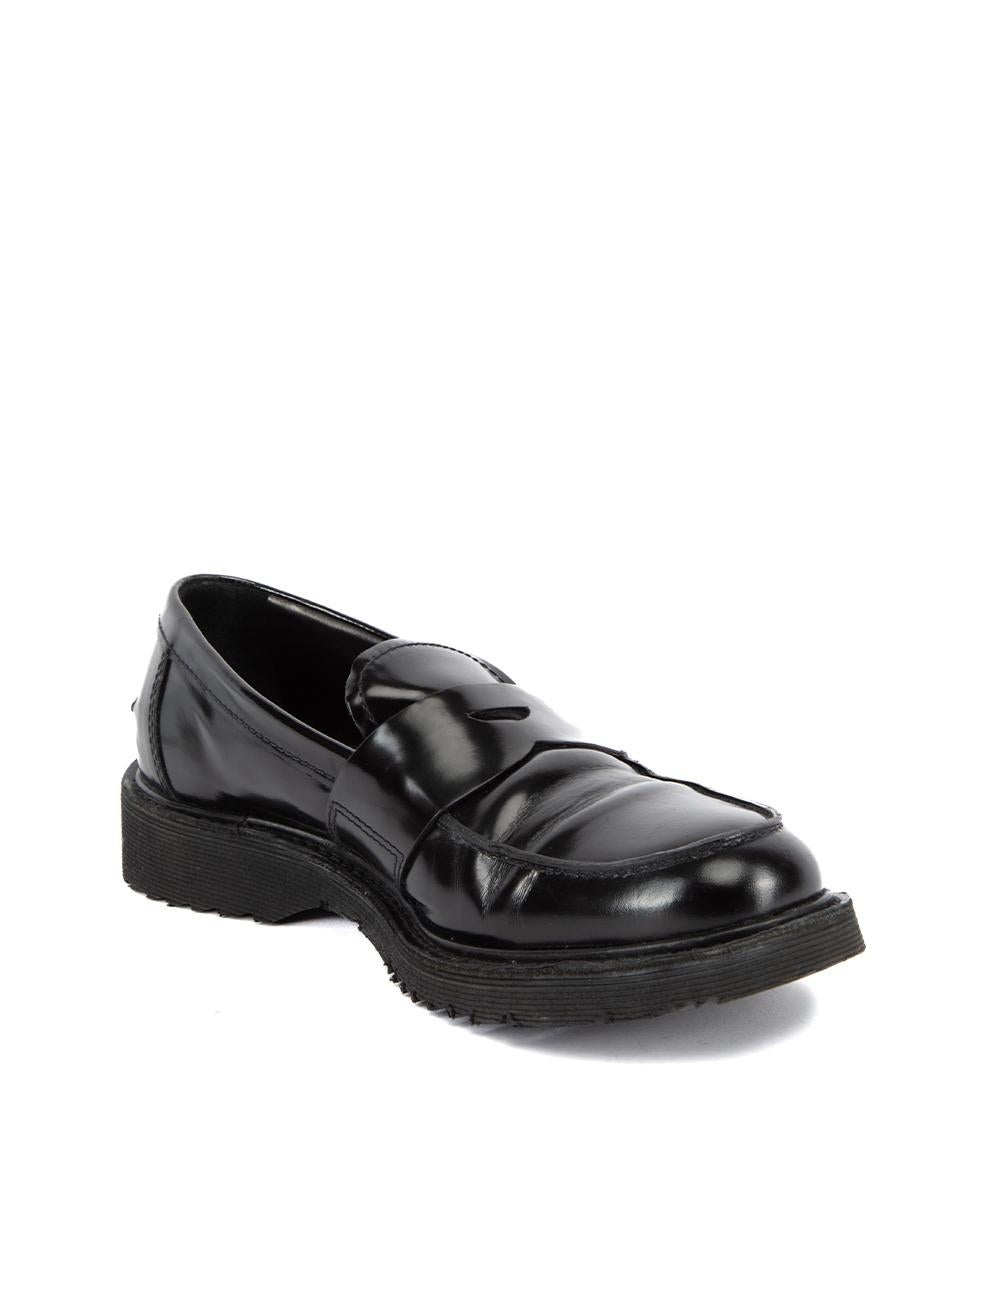 CONDITION is Very good. Minimal wear to shoes is evident. Minimal wear to the leather exterior where creasing can be seen at the vamp. There are also scuffs seen to the midsole on this used Prada designer resale item. This item includes the original